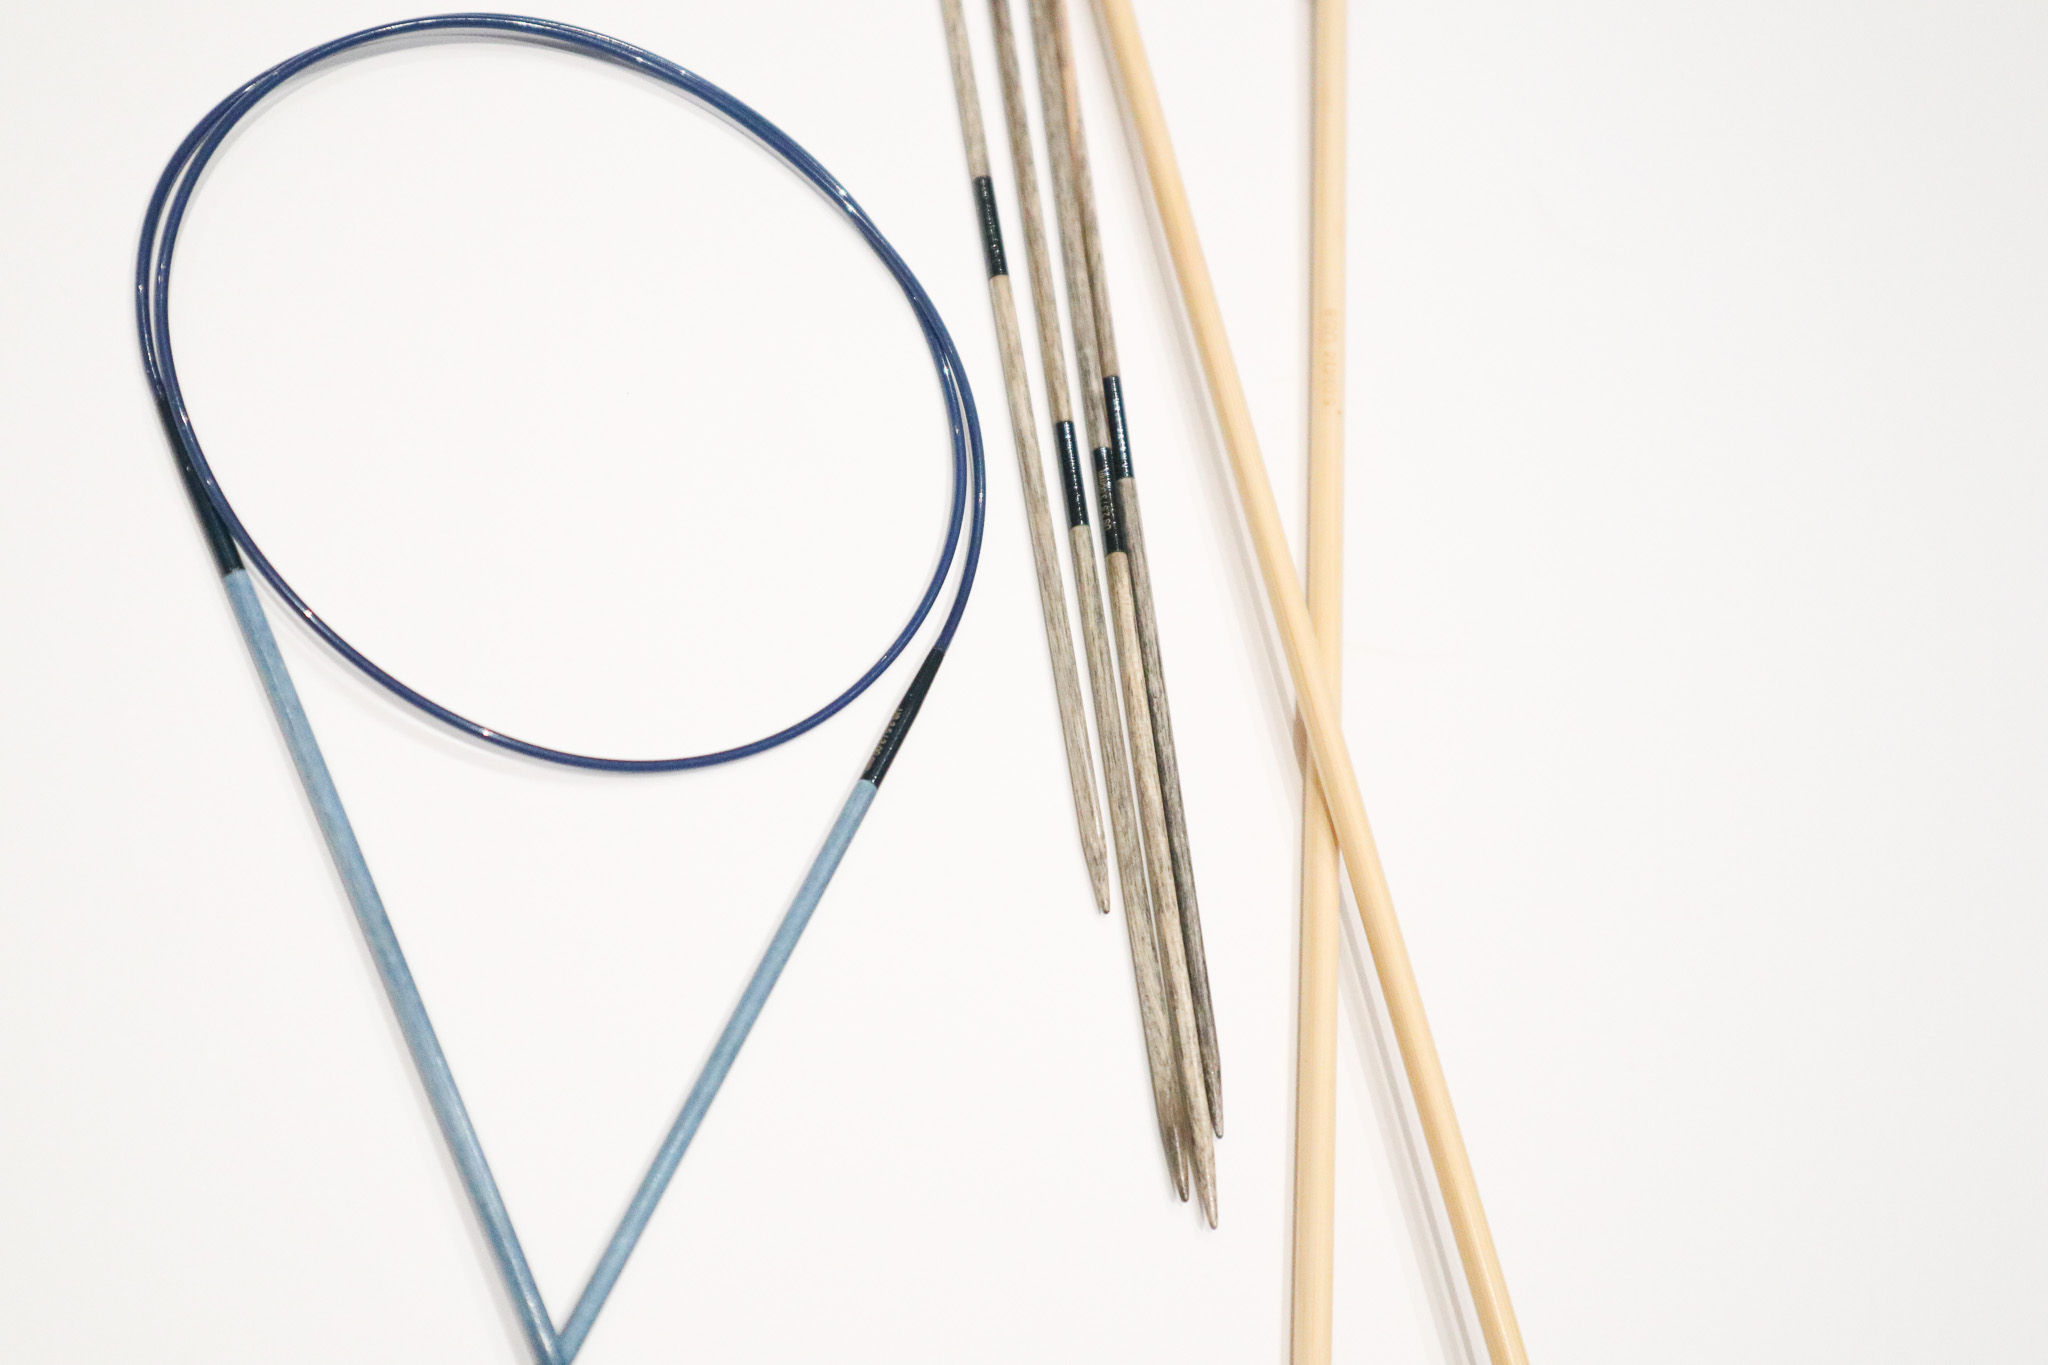 different knitting needles. Circular, double-pointed, and straight knitting needles